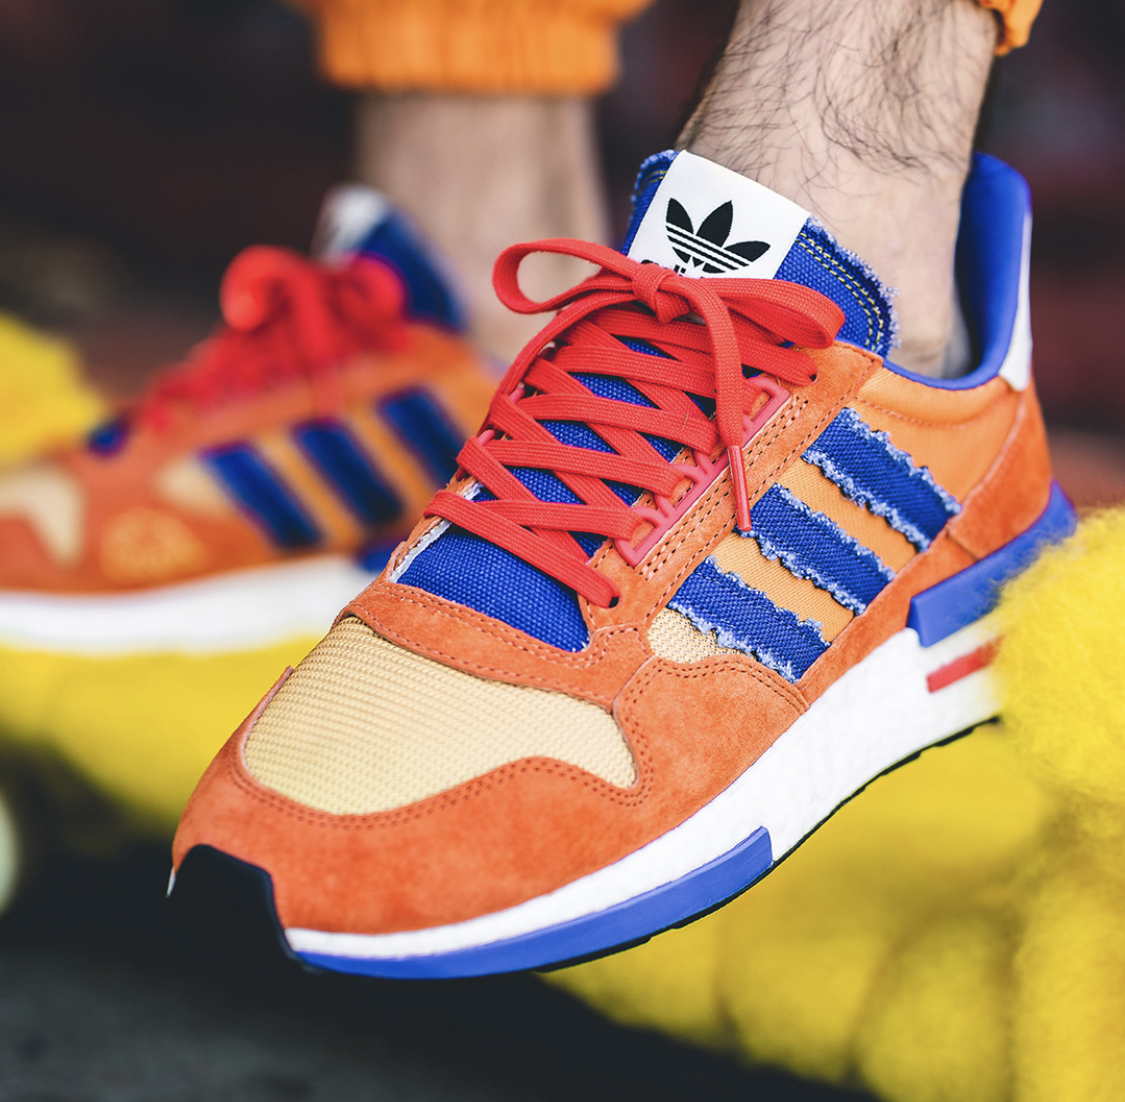 Now Available: Dragon Ball Z x adidas ZX 500 RM Goku" — Sneaker Shouts